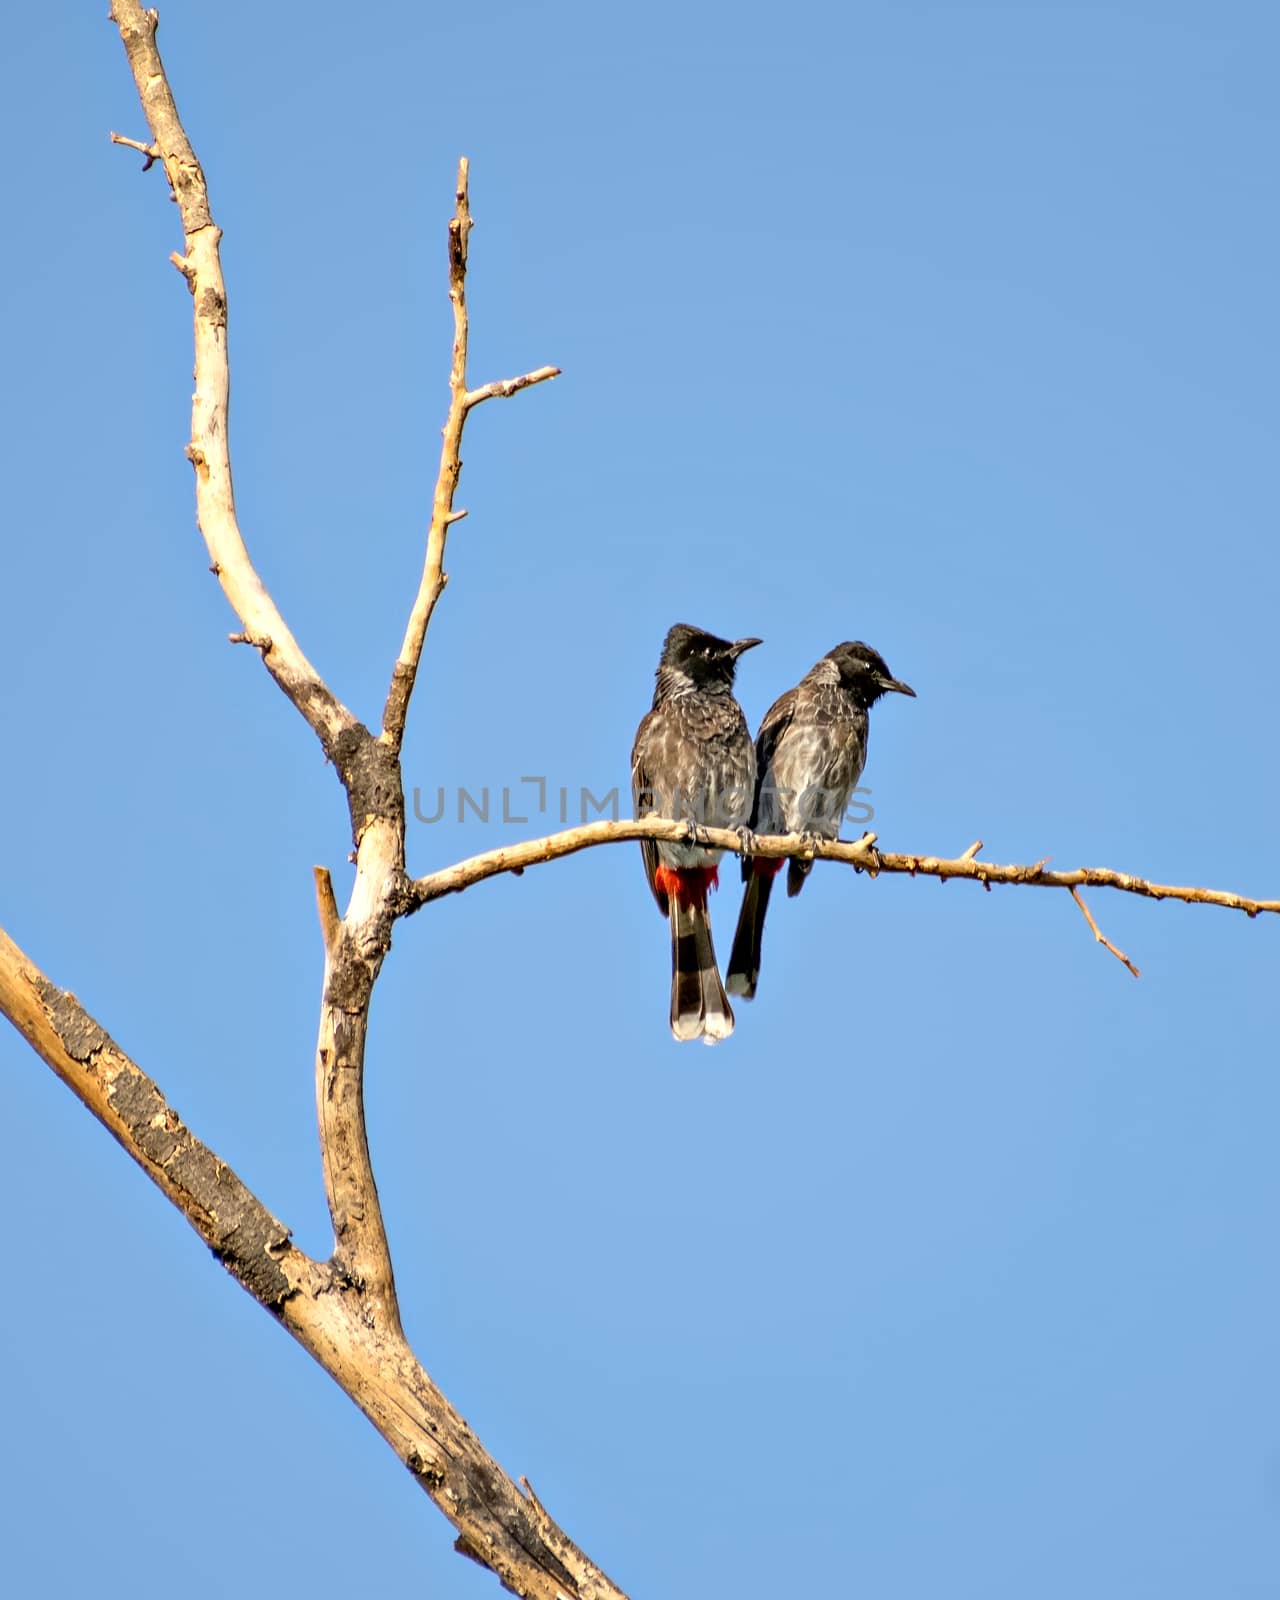 Two Red vented bulbul sitting side by side on dry tree branch with clear blue sky background.